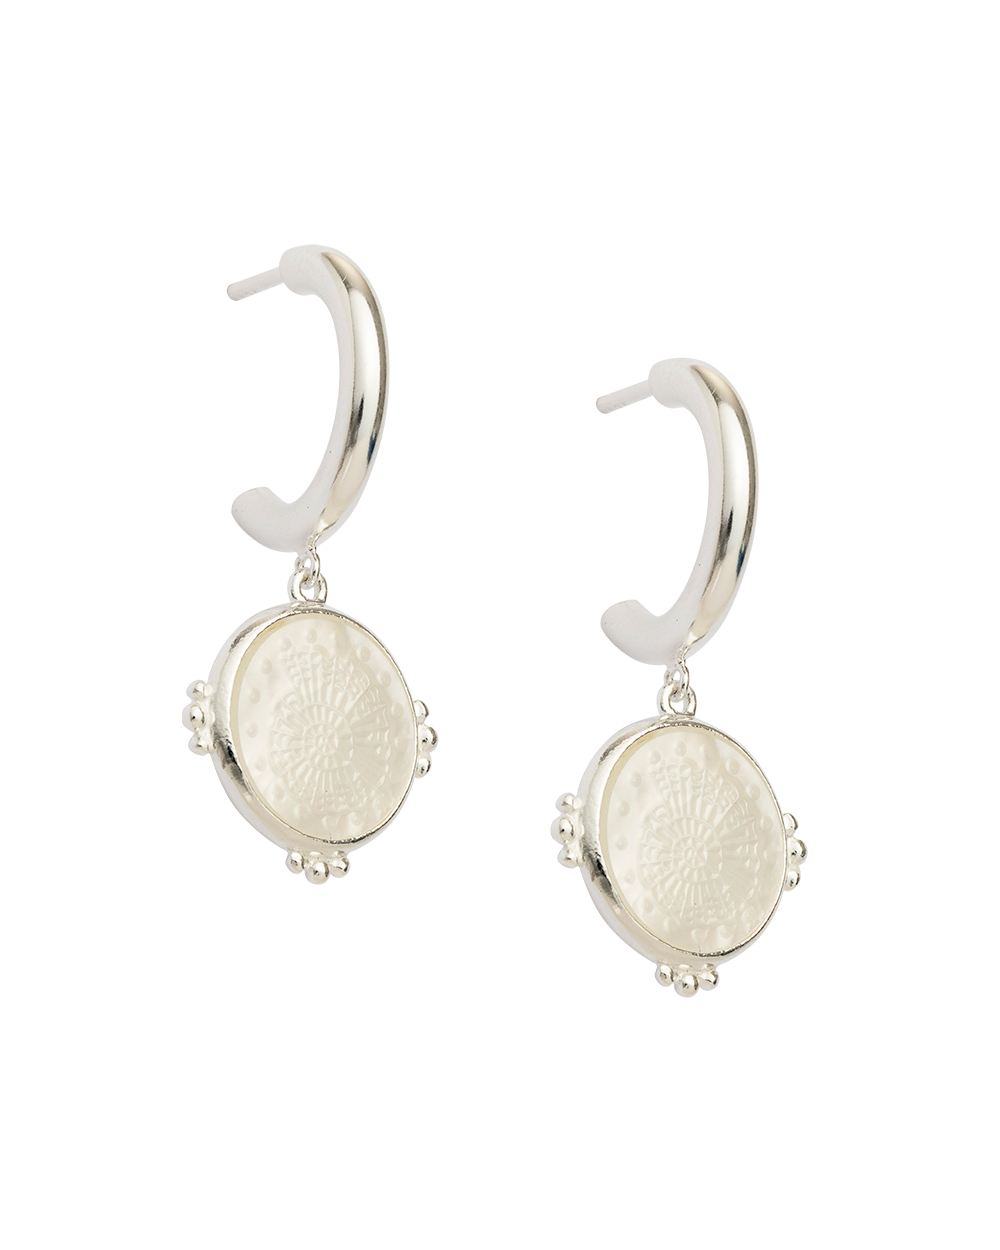 FOSSIL SHELL HOOPS (STERLING SILVER) - IMAGE 1